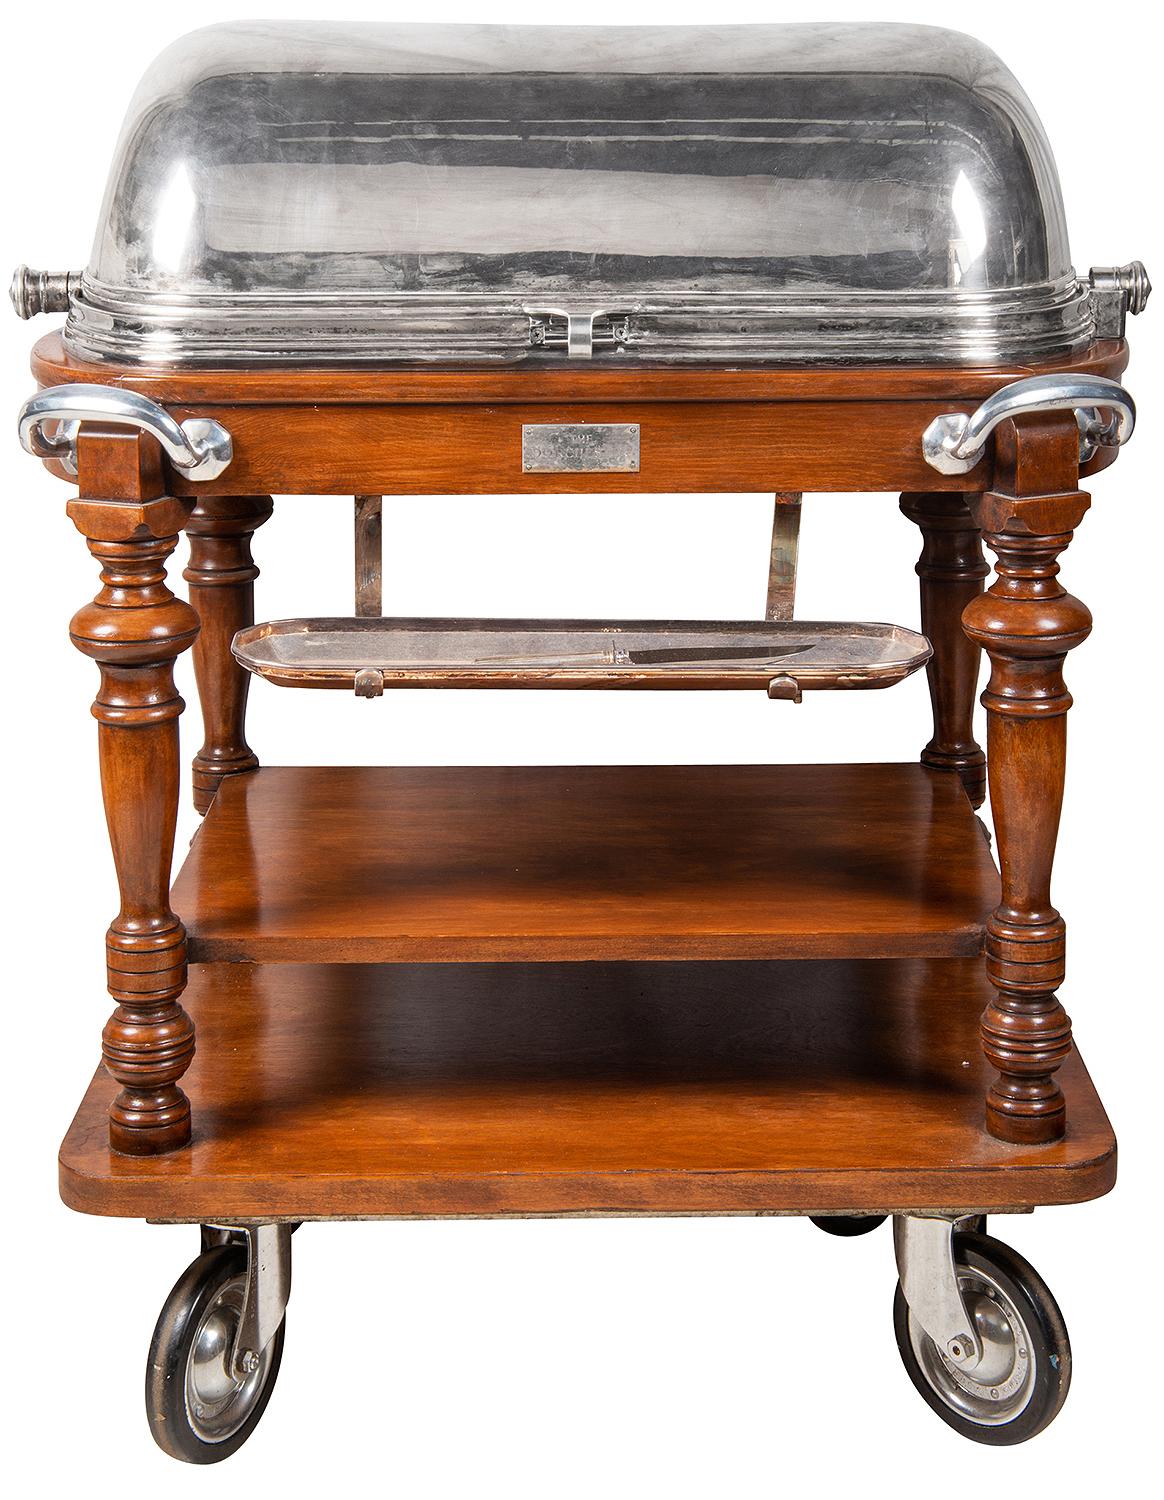 A very good quality early 20th century silver plated and mahogany carving trolley, having a domed, hinged lid opening to reveal the carving surface, lidded containers, carving implements, shelves below, turned legs, silver plated handles and raised